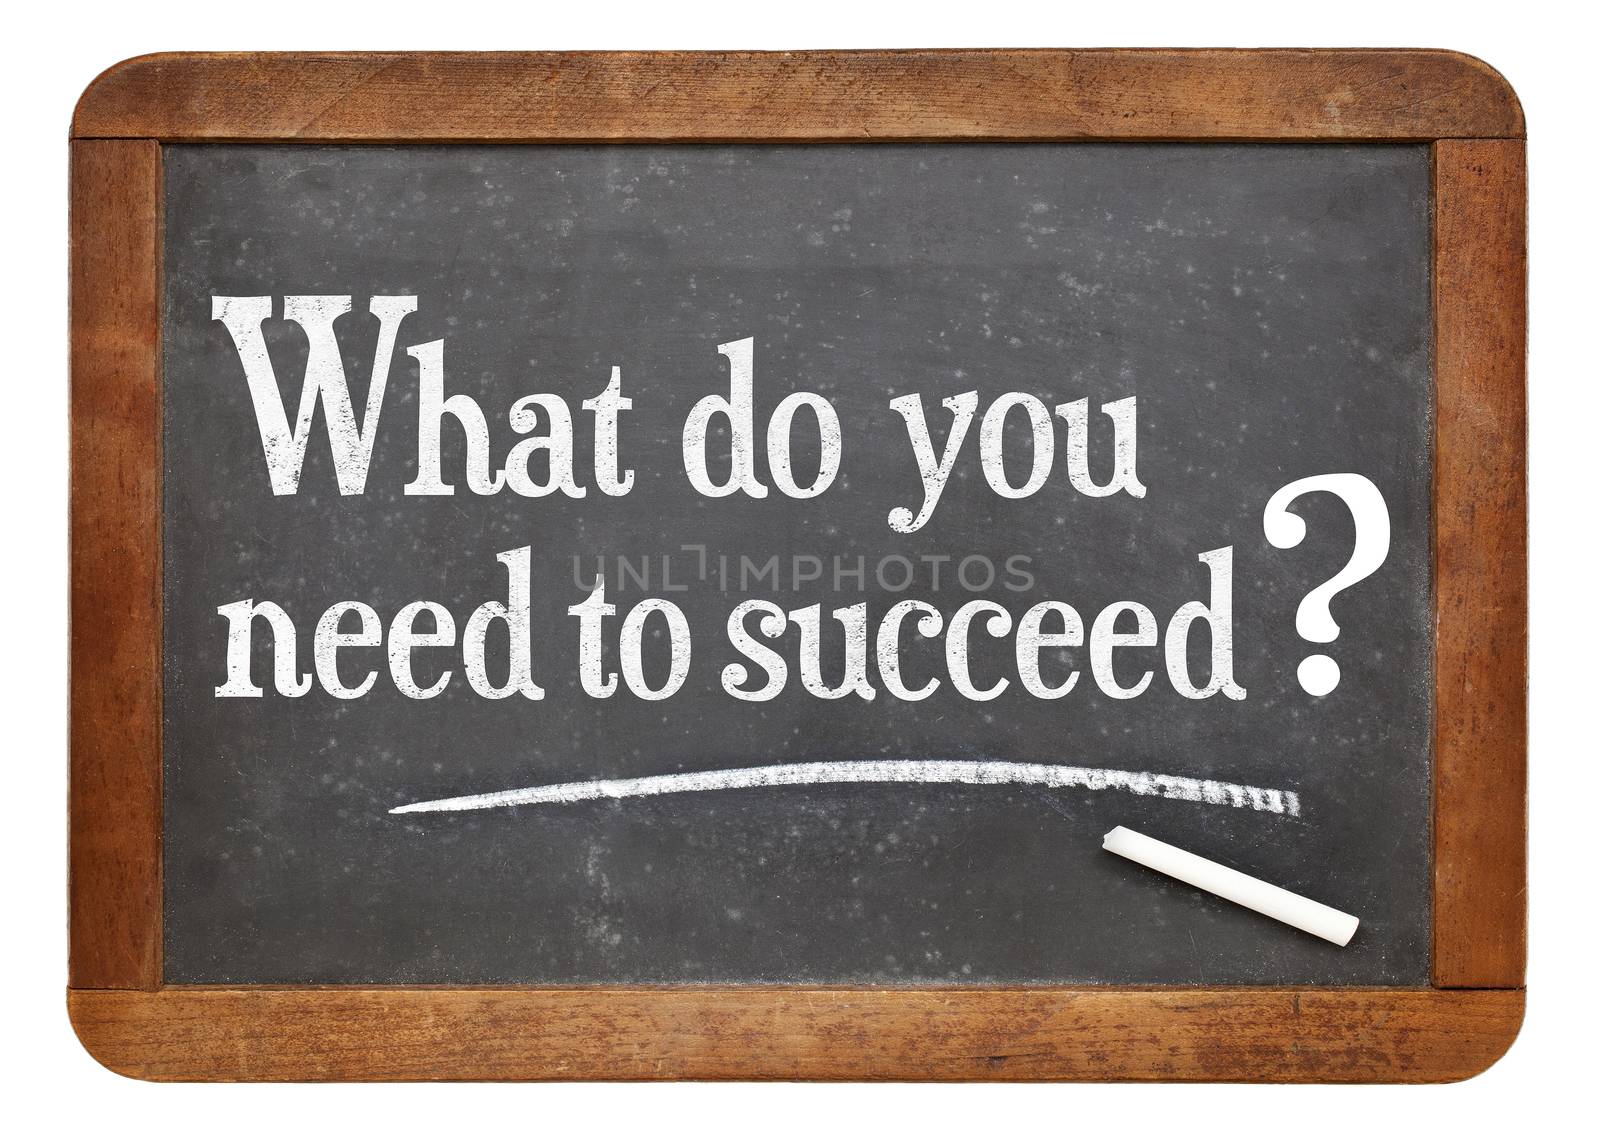 What do you need to succeed? by PixelsAway